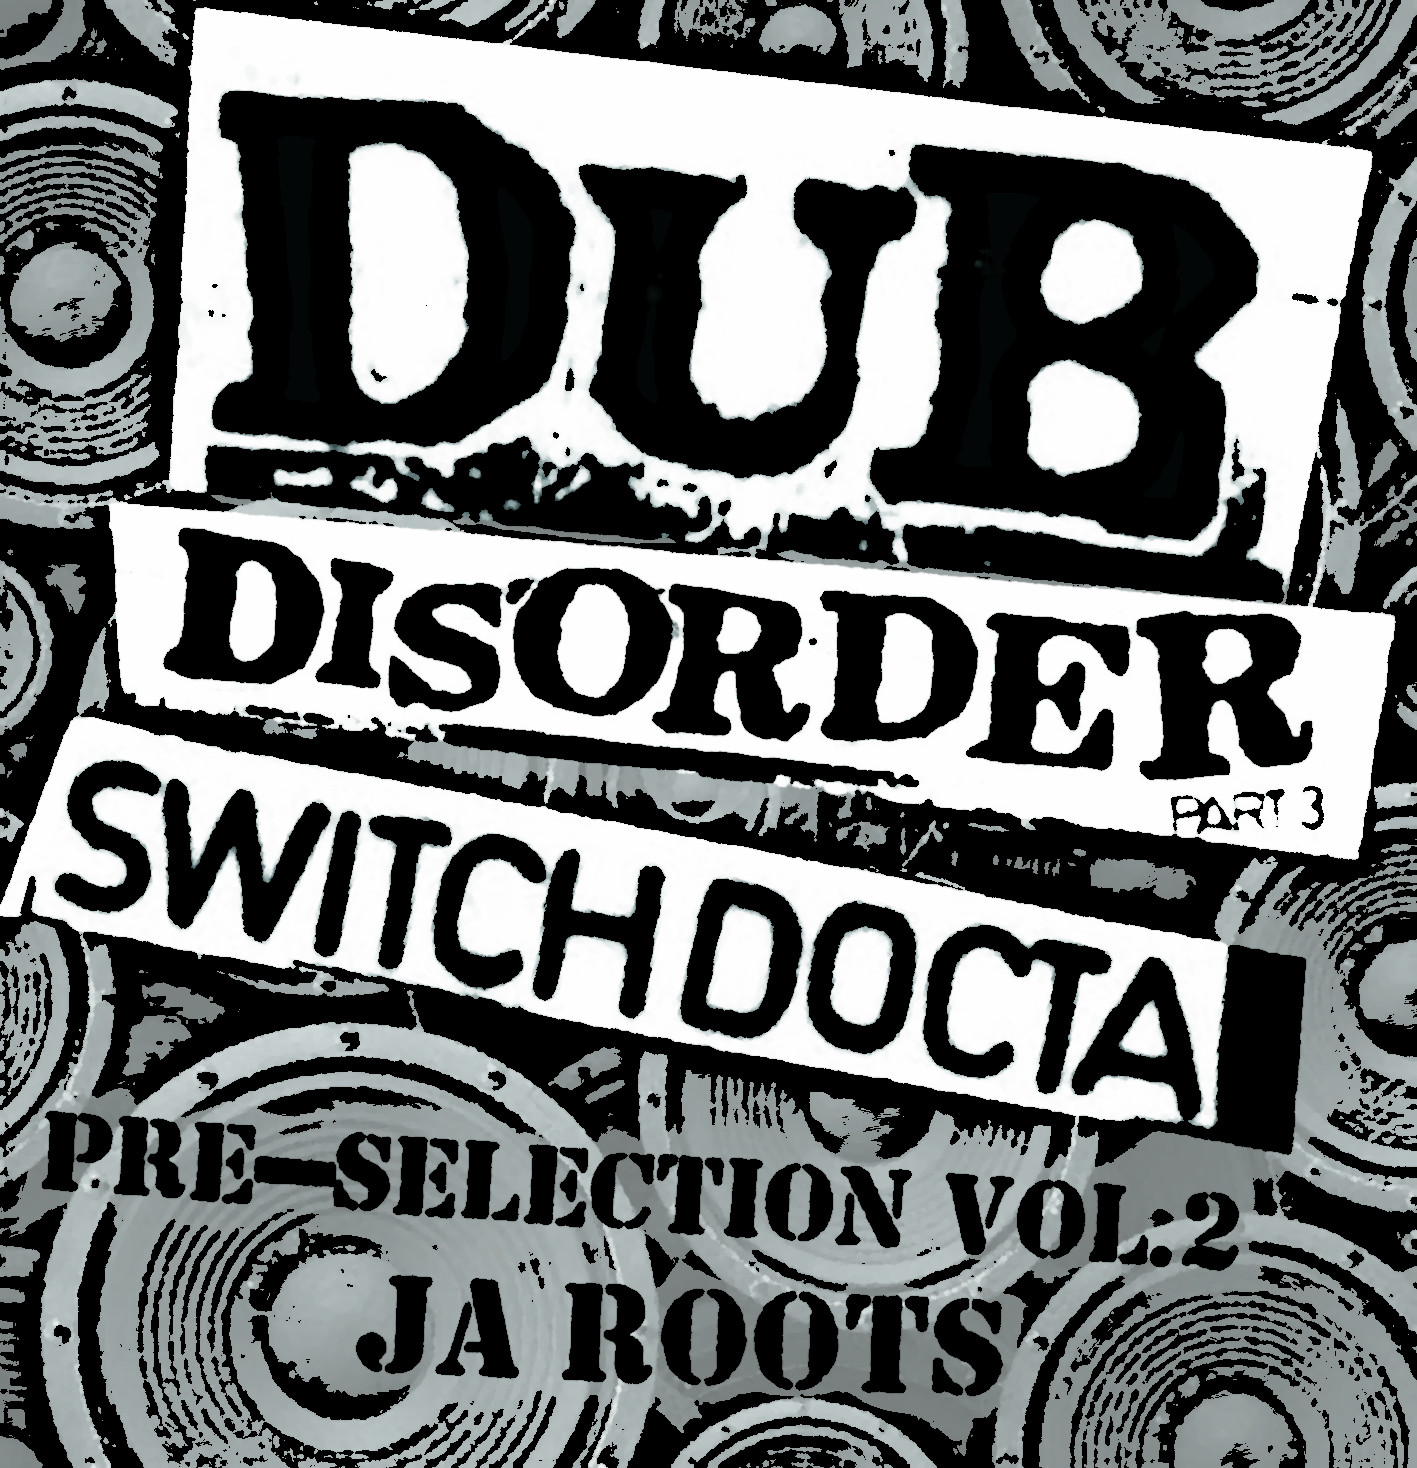 Dub Disorder part 3: the Switch Docta pre-selections Vol. 2 / JA Roots